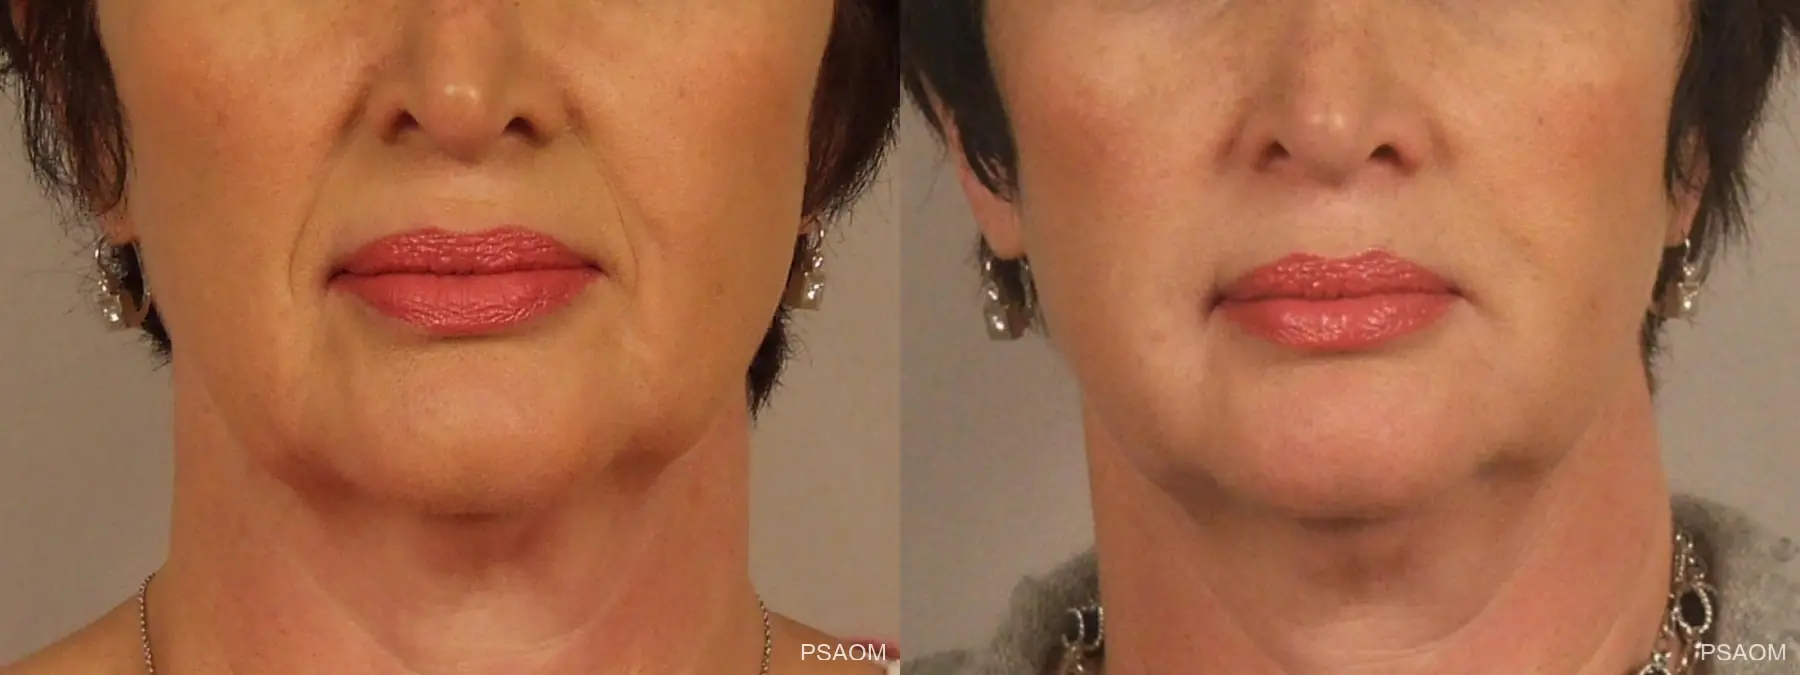 Injectables - Face: Patient 1 - Before and After  